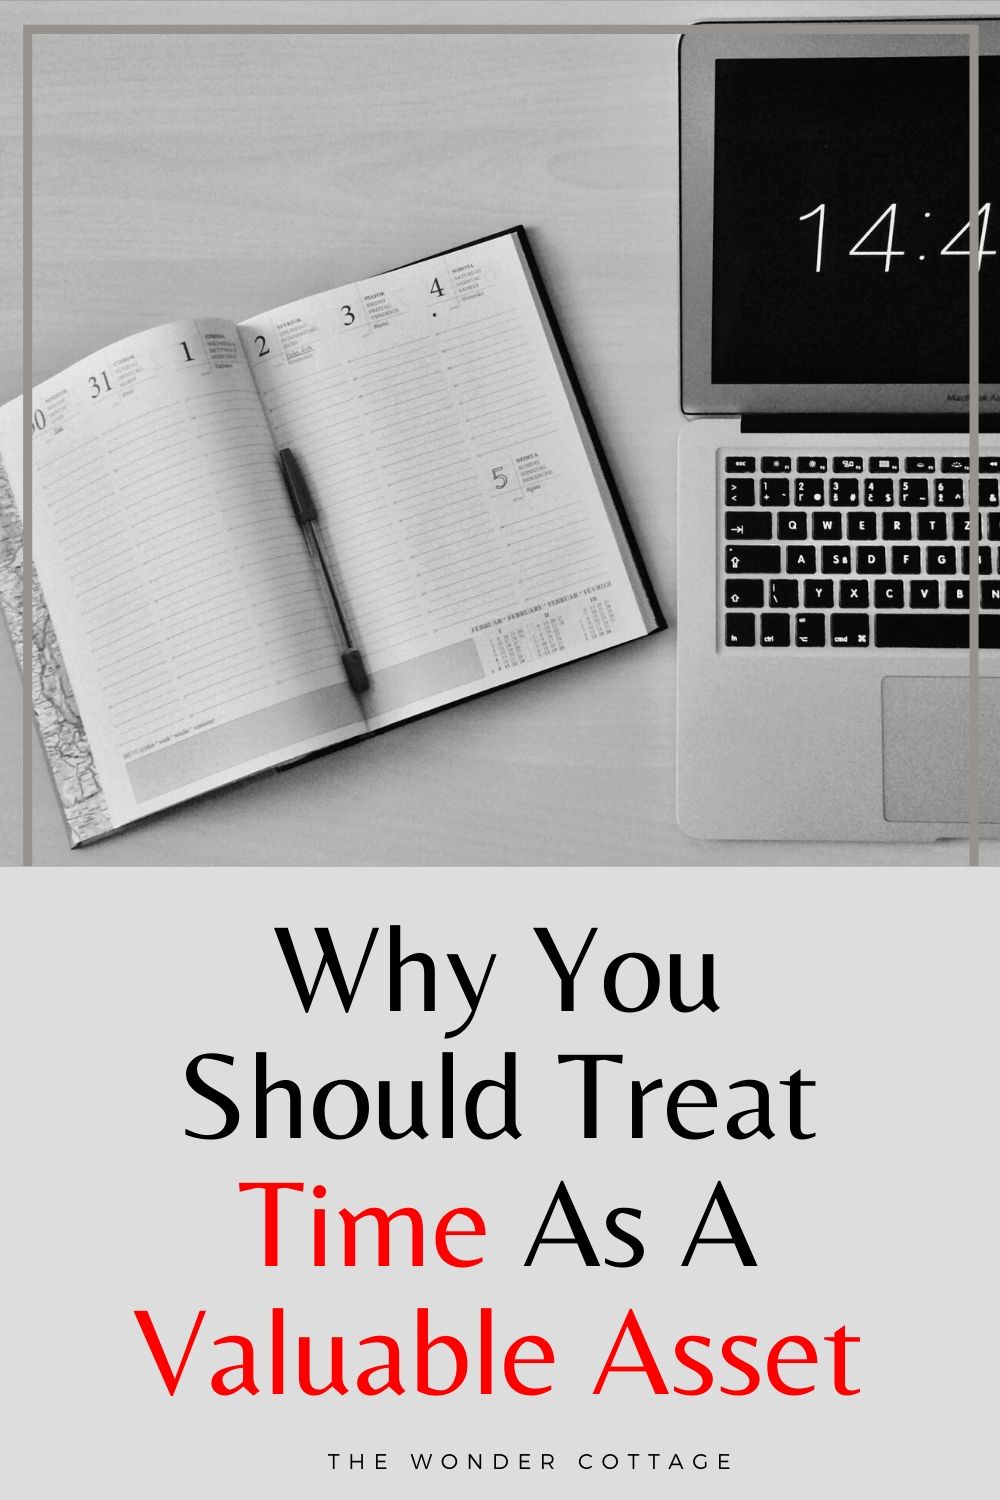 Why you should treat time as a valuable asset